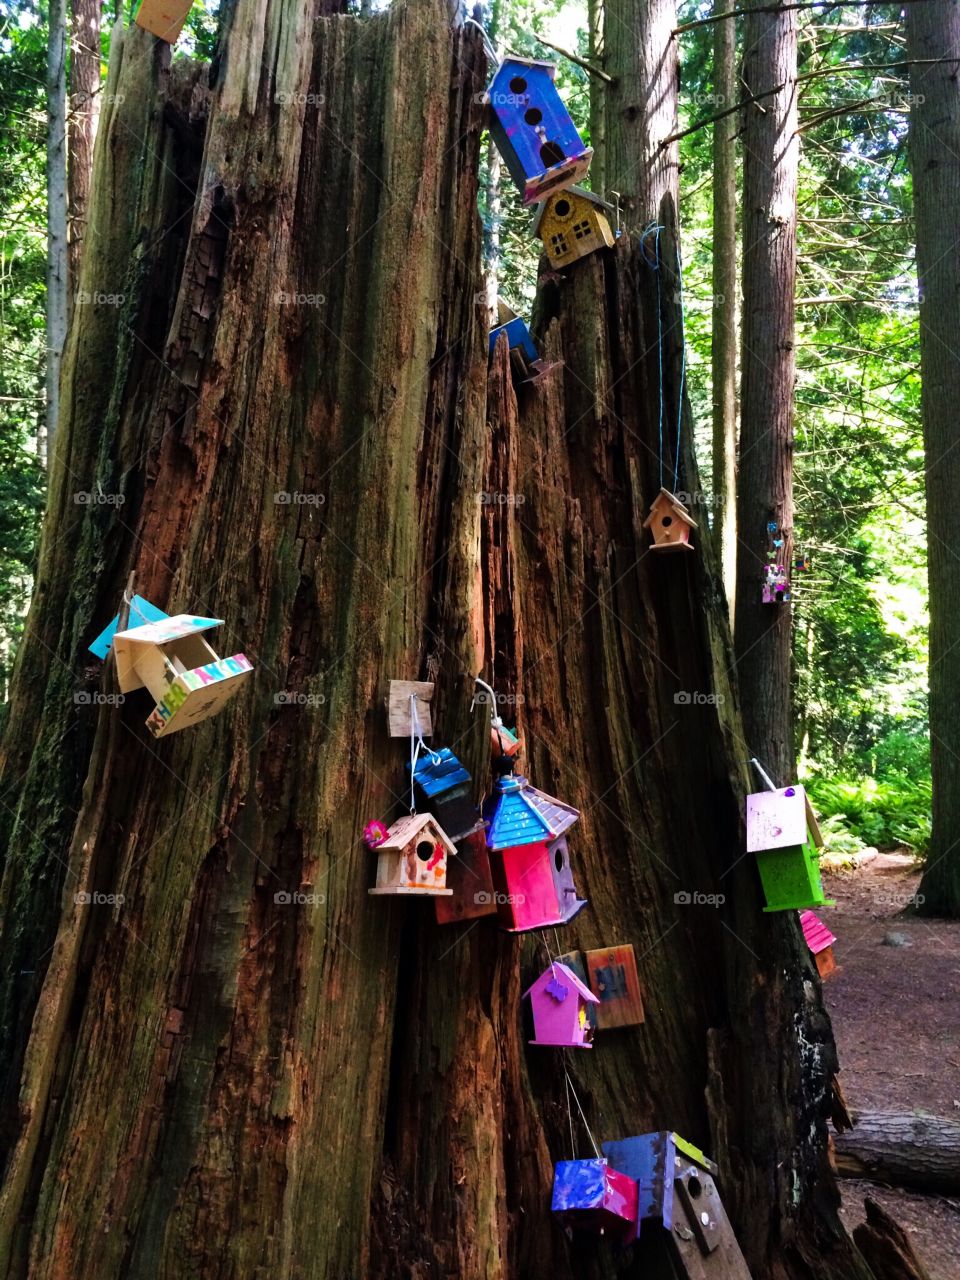 Fairy Houses in the Forest. Travelled to "Pixie Hollow" on a fine weekend. 